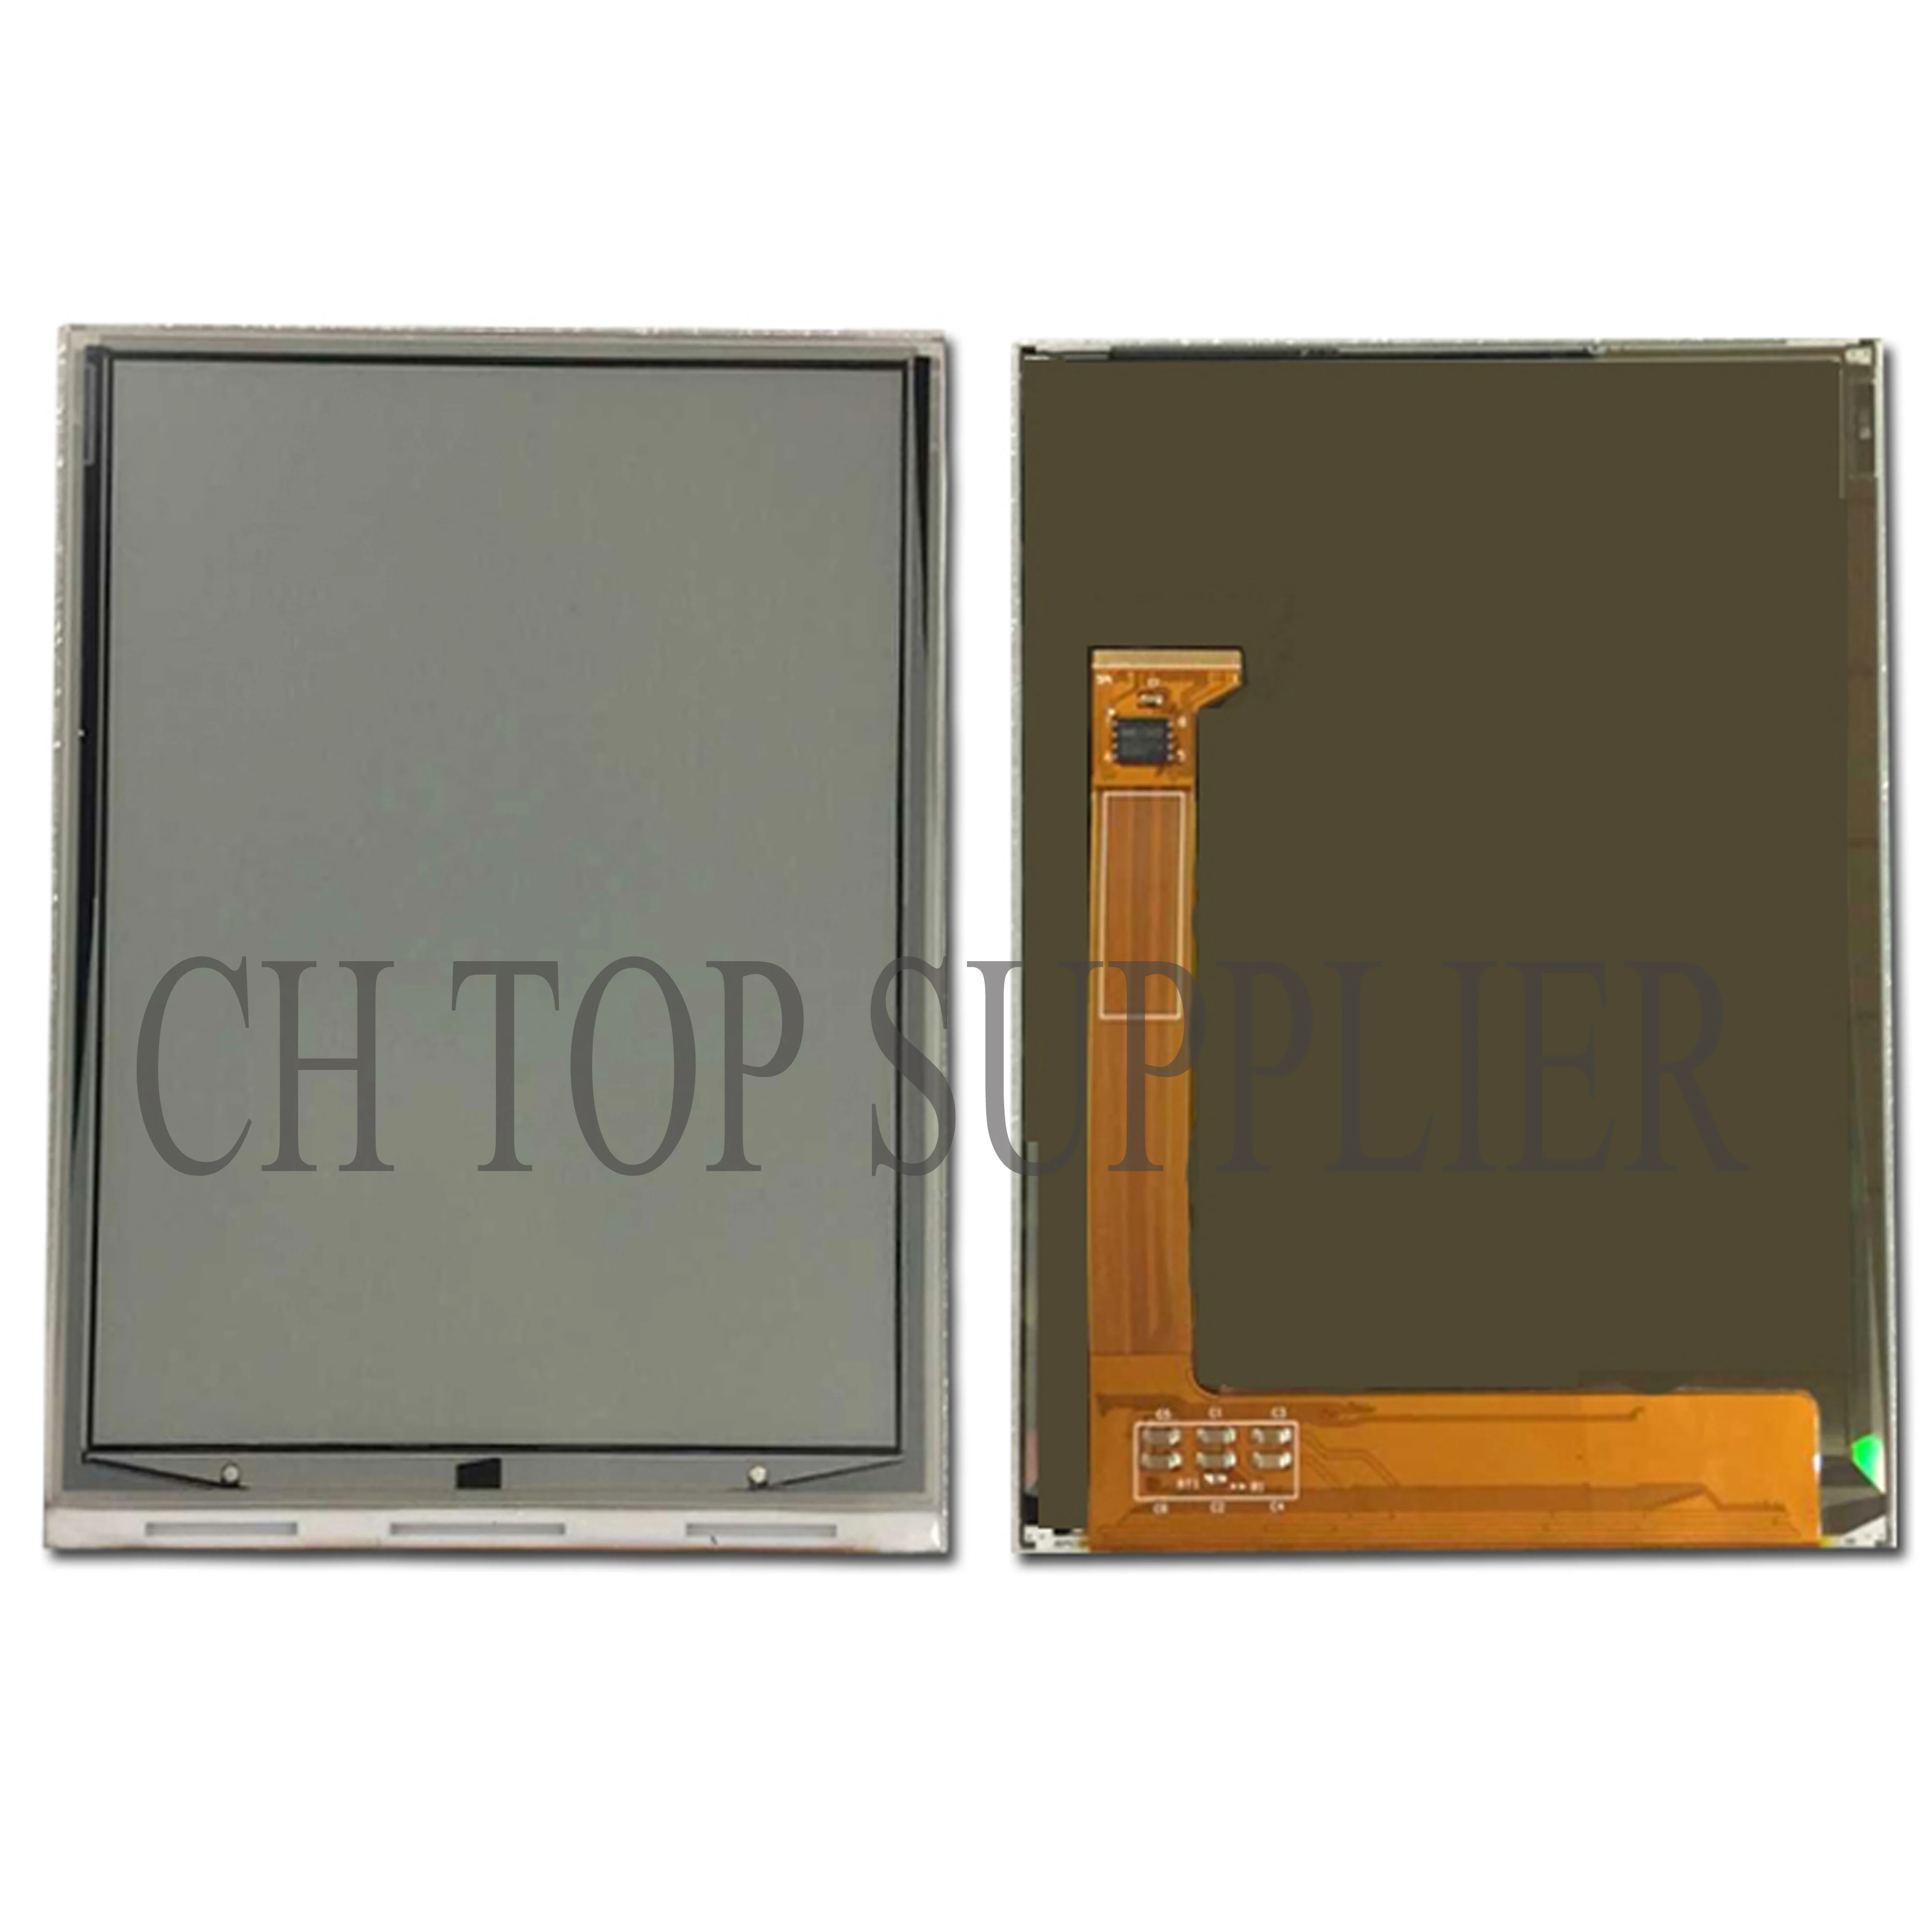 New 6.0 Inch LCD screen ED060SCF(LF)T1 E-ink For Amazon kindle 4 Ebook Reader Display